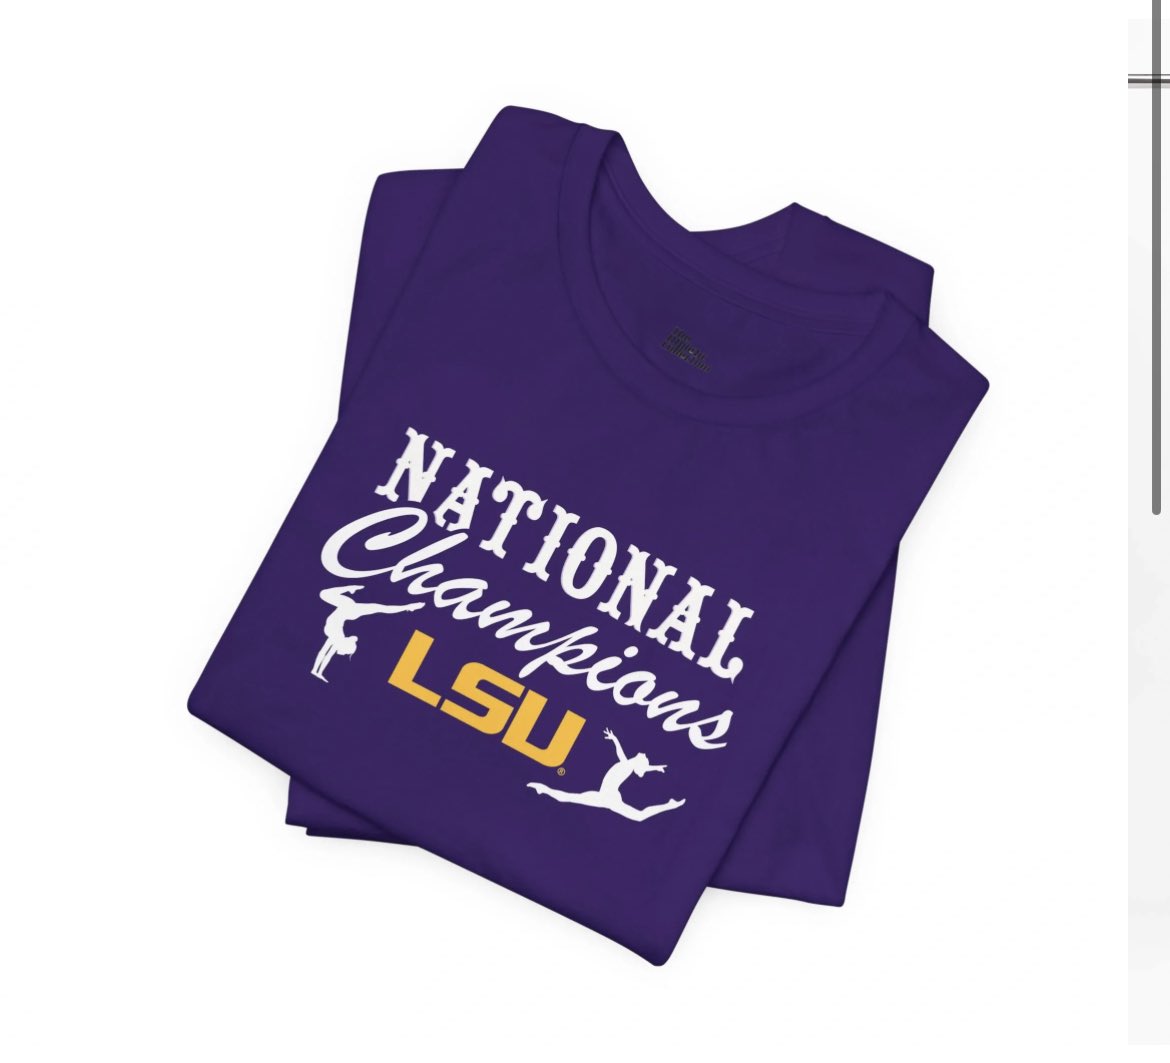 Link below! Will be adding more designs throughout the day! @LSUgym national championship gear! RT this and I’ll DM you a promo code 👀 shop-tac.com/shop-with-us-1…